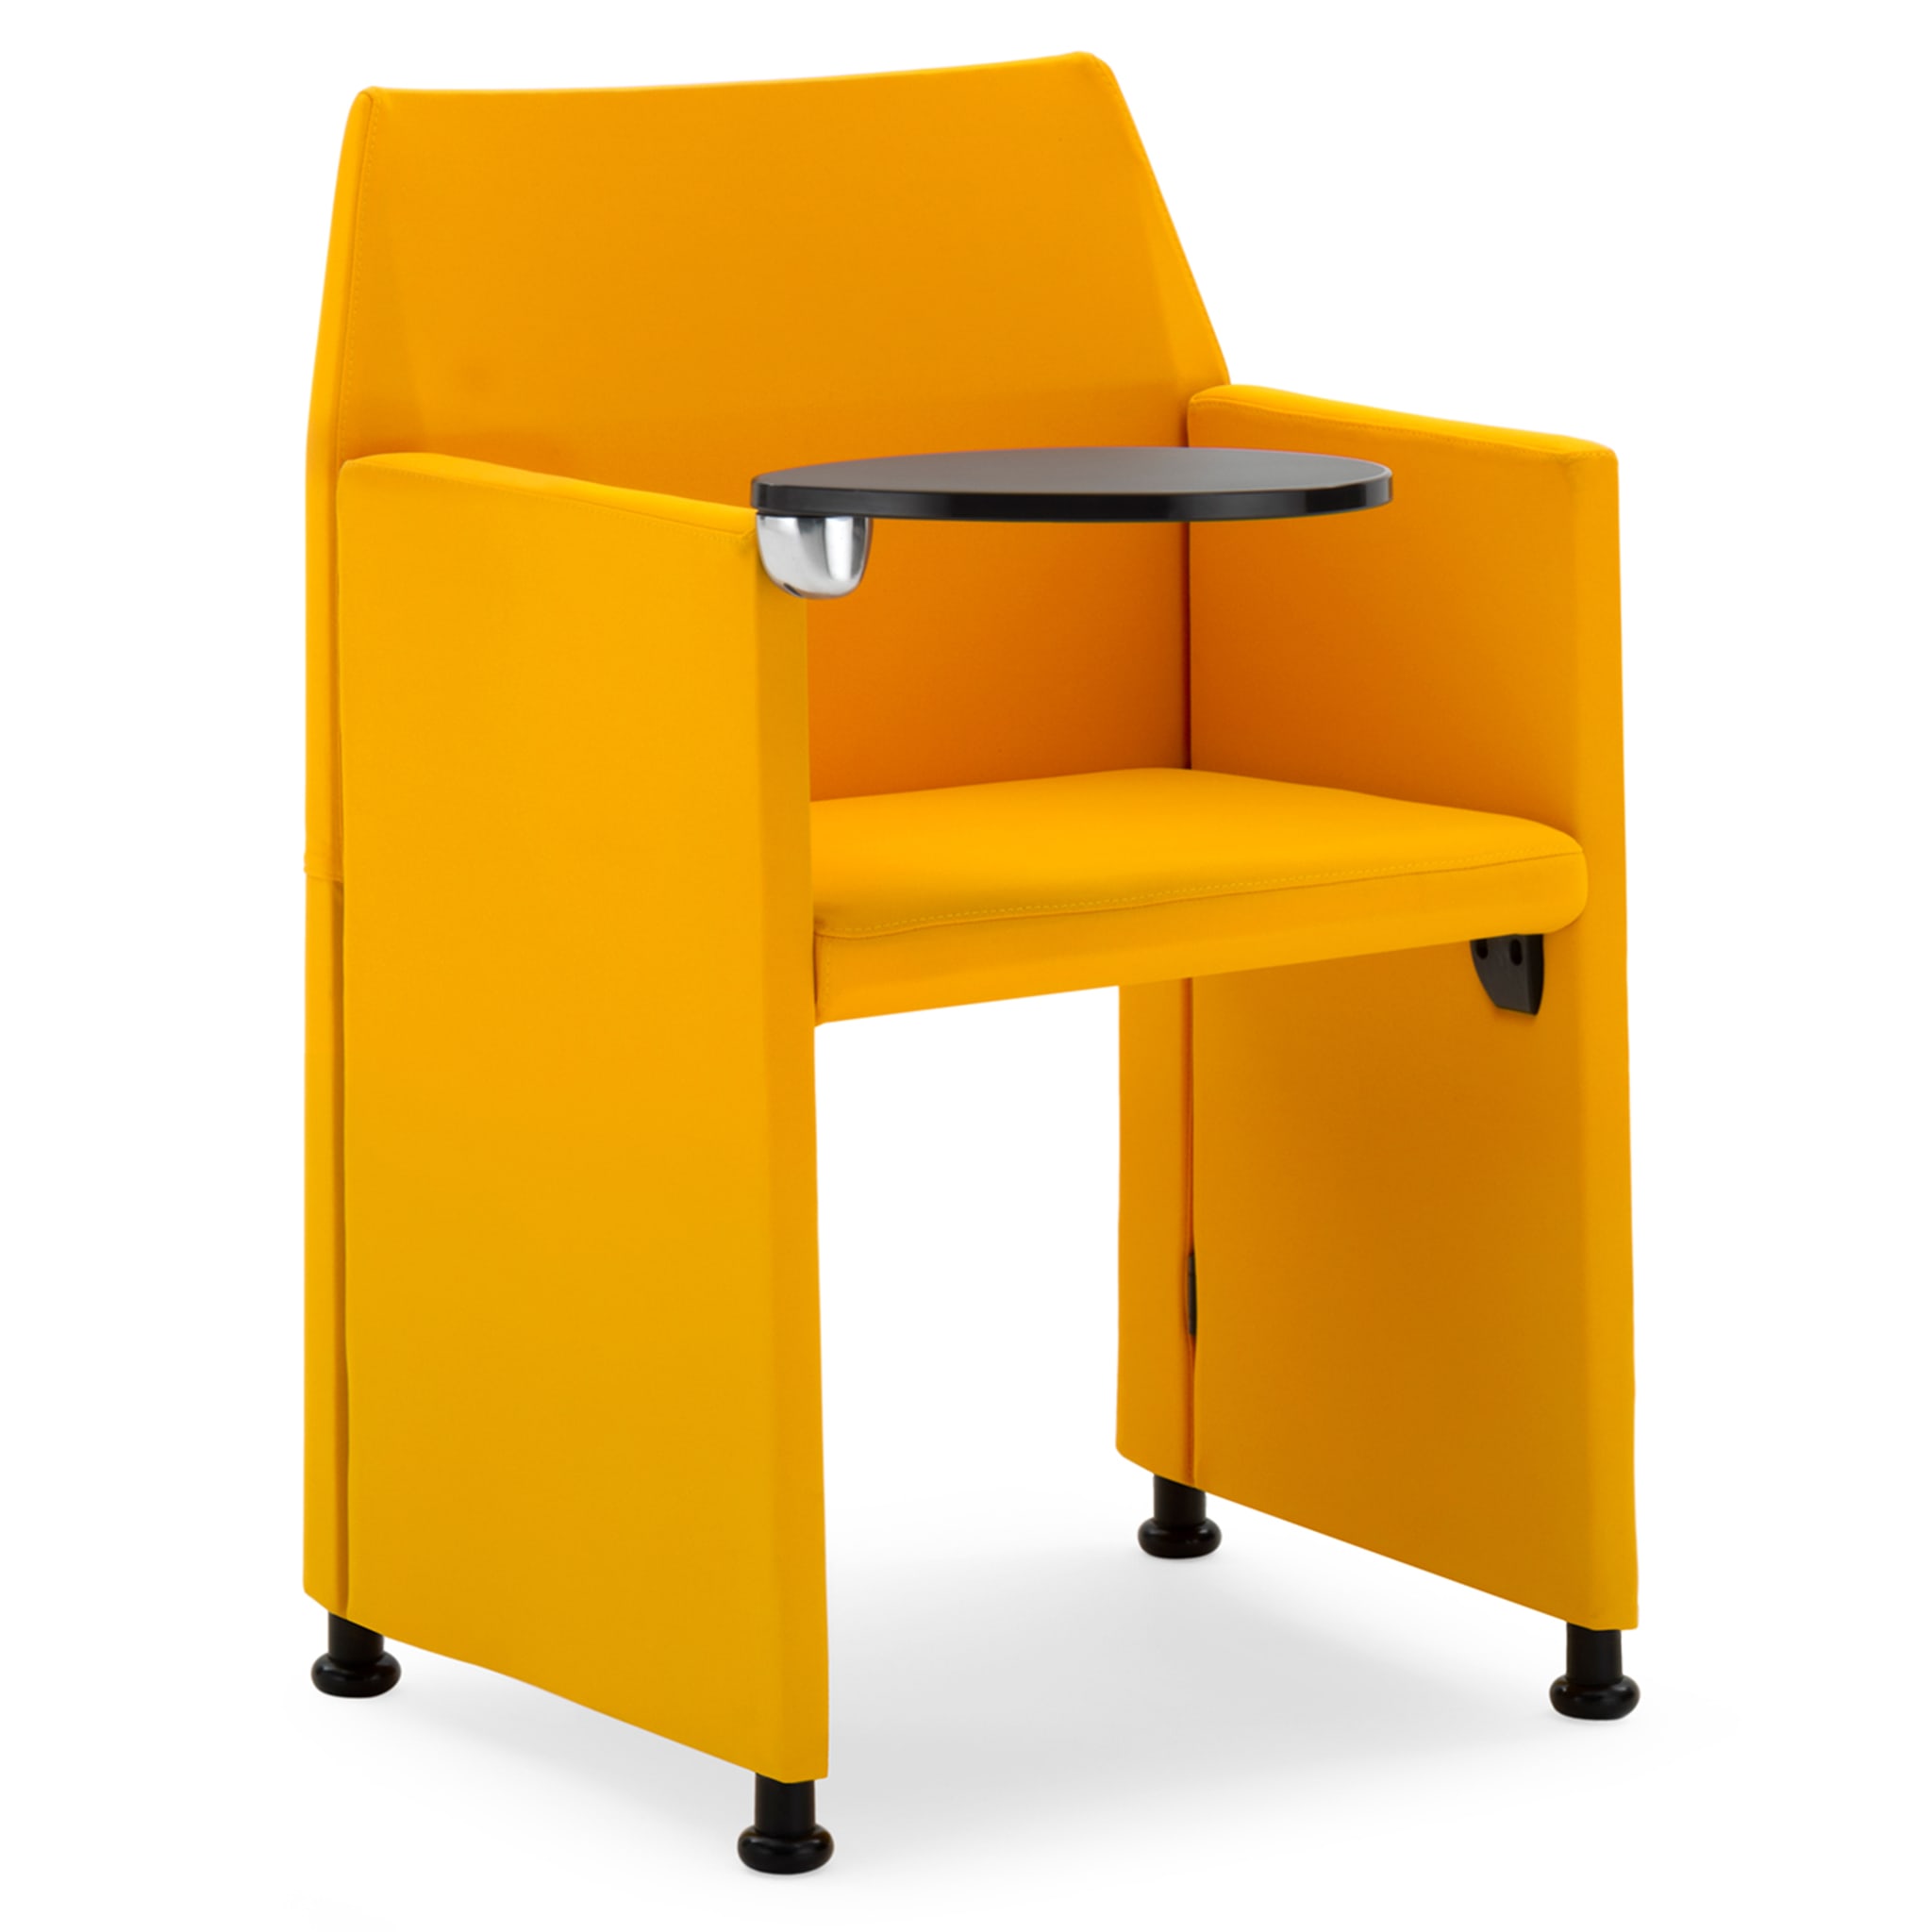 SYRIO YELLOW CHAIR WITH writing pad - Alternative view 1